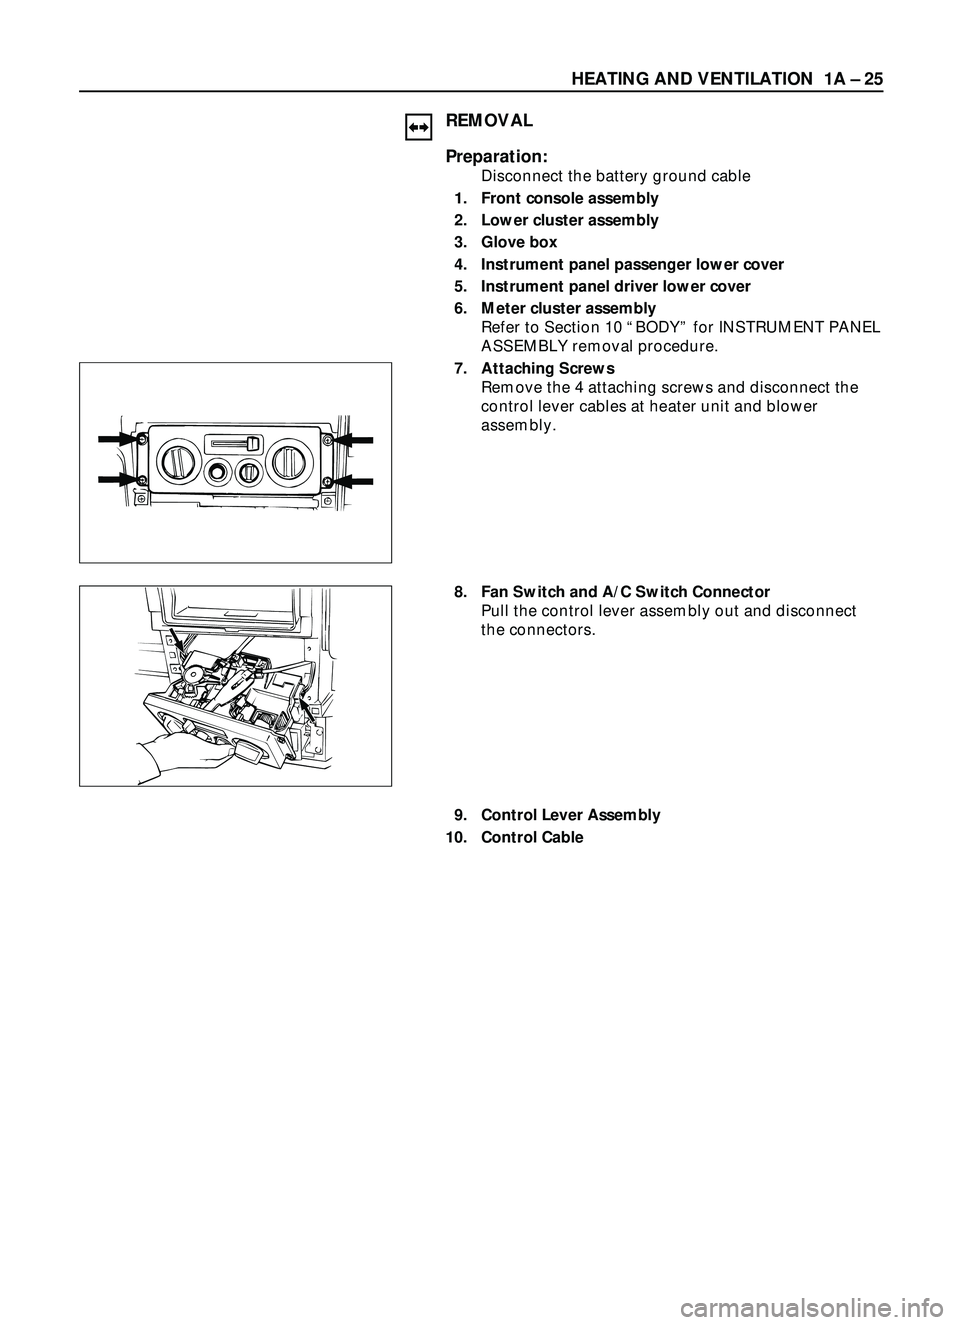 ISUZU TROOPER 1998  Service Repair Manual HEATING AND VENTILATION  1A Ð 25
REMOVAL
Preparation:
Disconnect the battery ground cable 
1. Front console assembly 
2. Lower cluster assembly
3. Glove box
4. Instrument panel passenger lower cover
